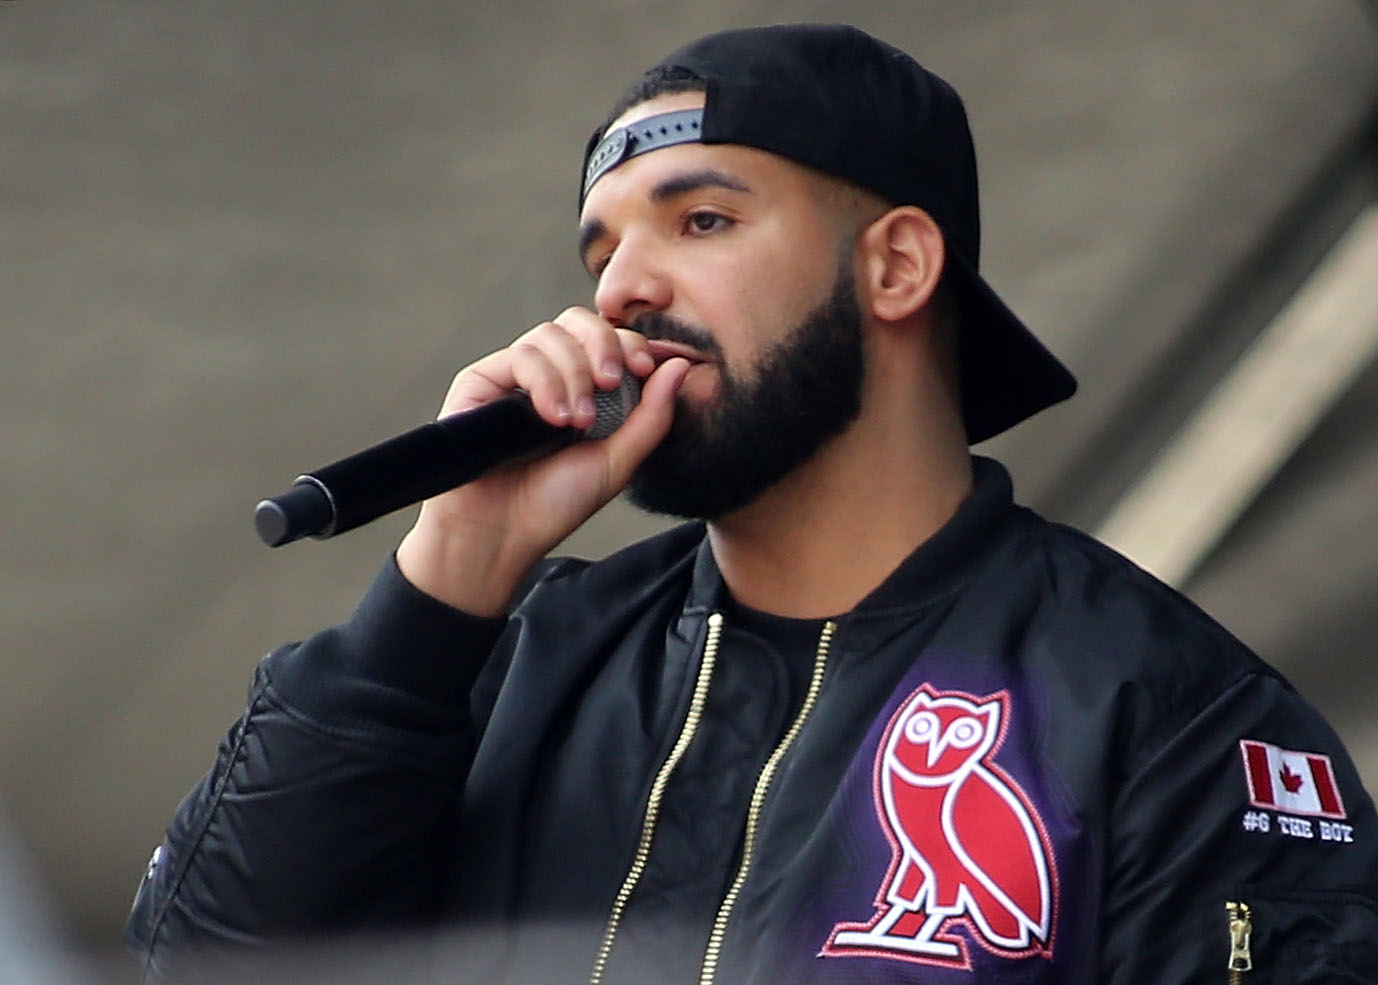 Drake at the Toronto Raptors Championship victory parade in 2019 in Toronto. (Getty Images&mdash;2019 Isaiah Trickey)